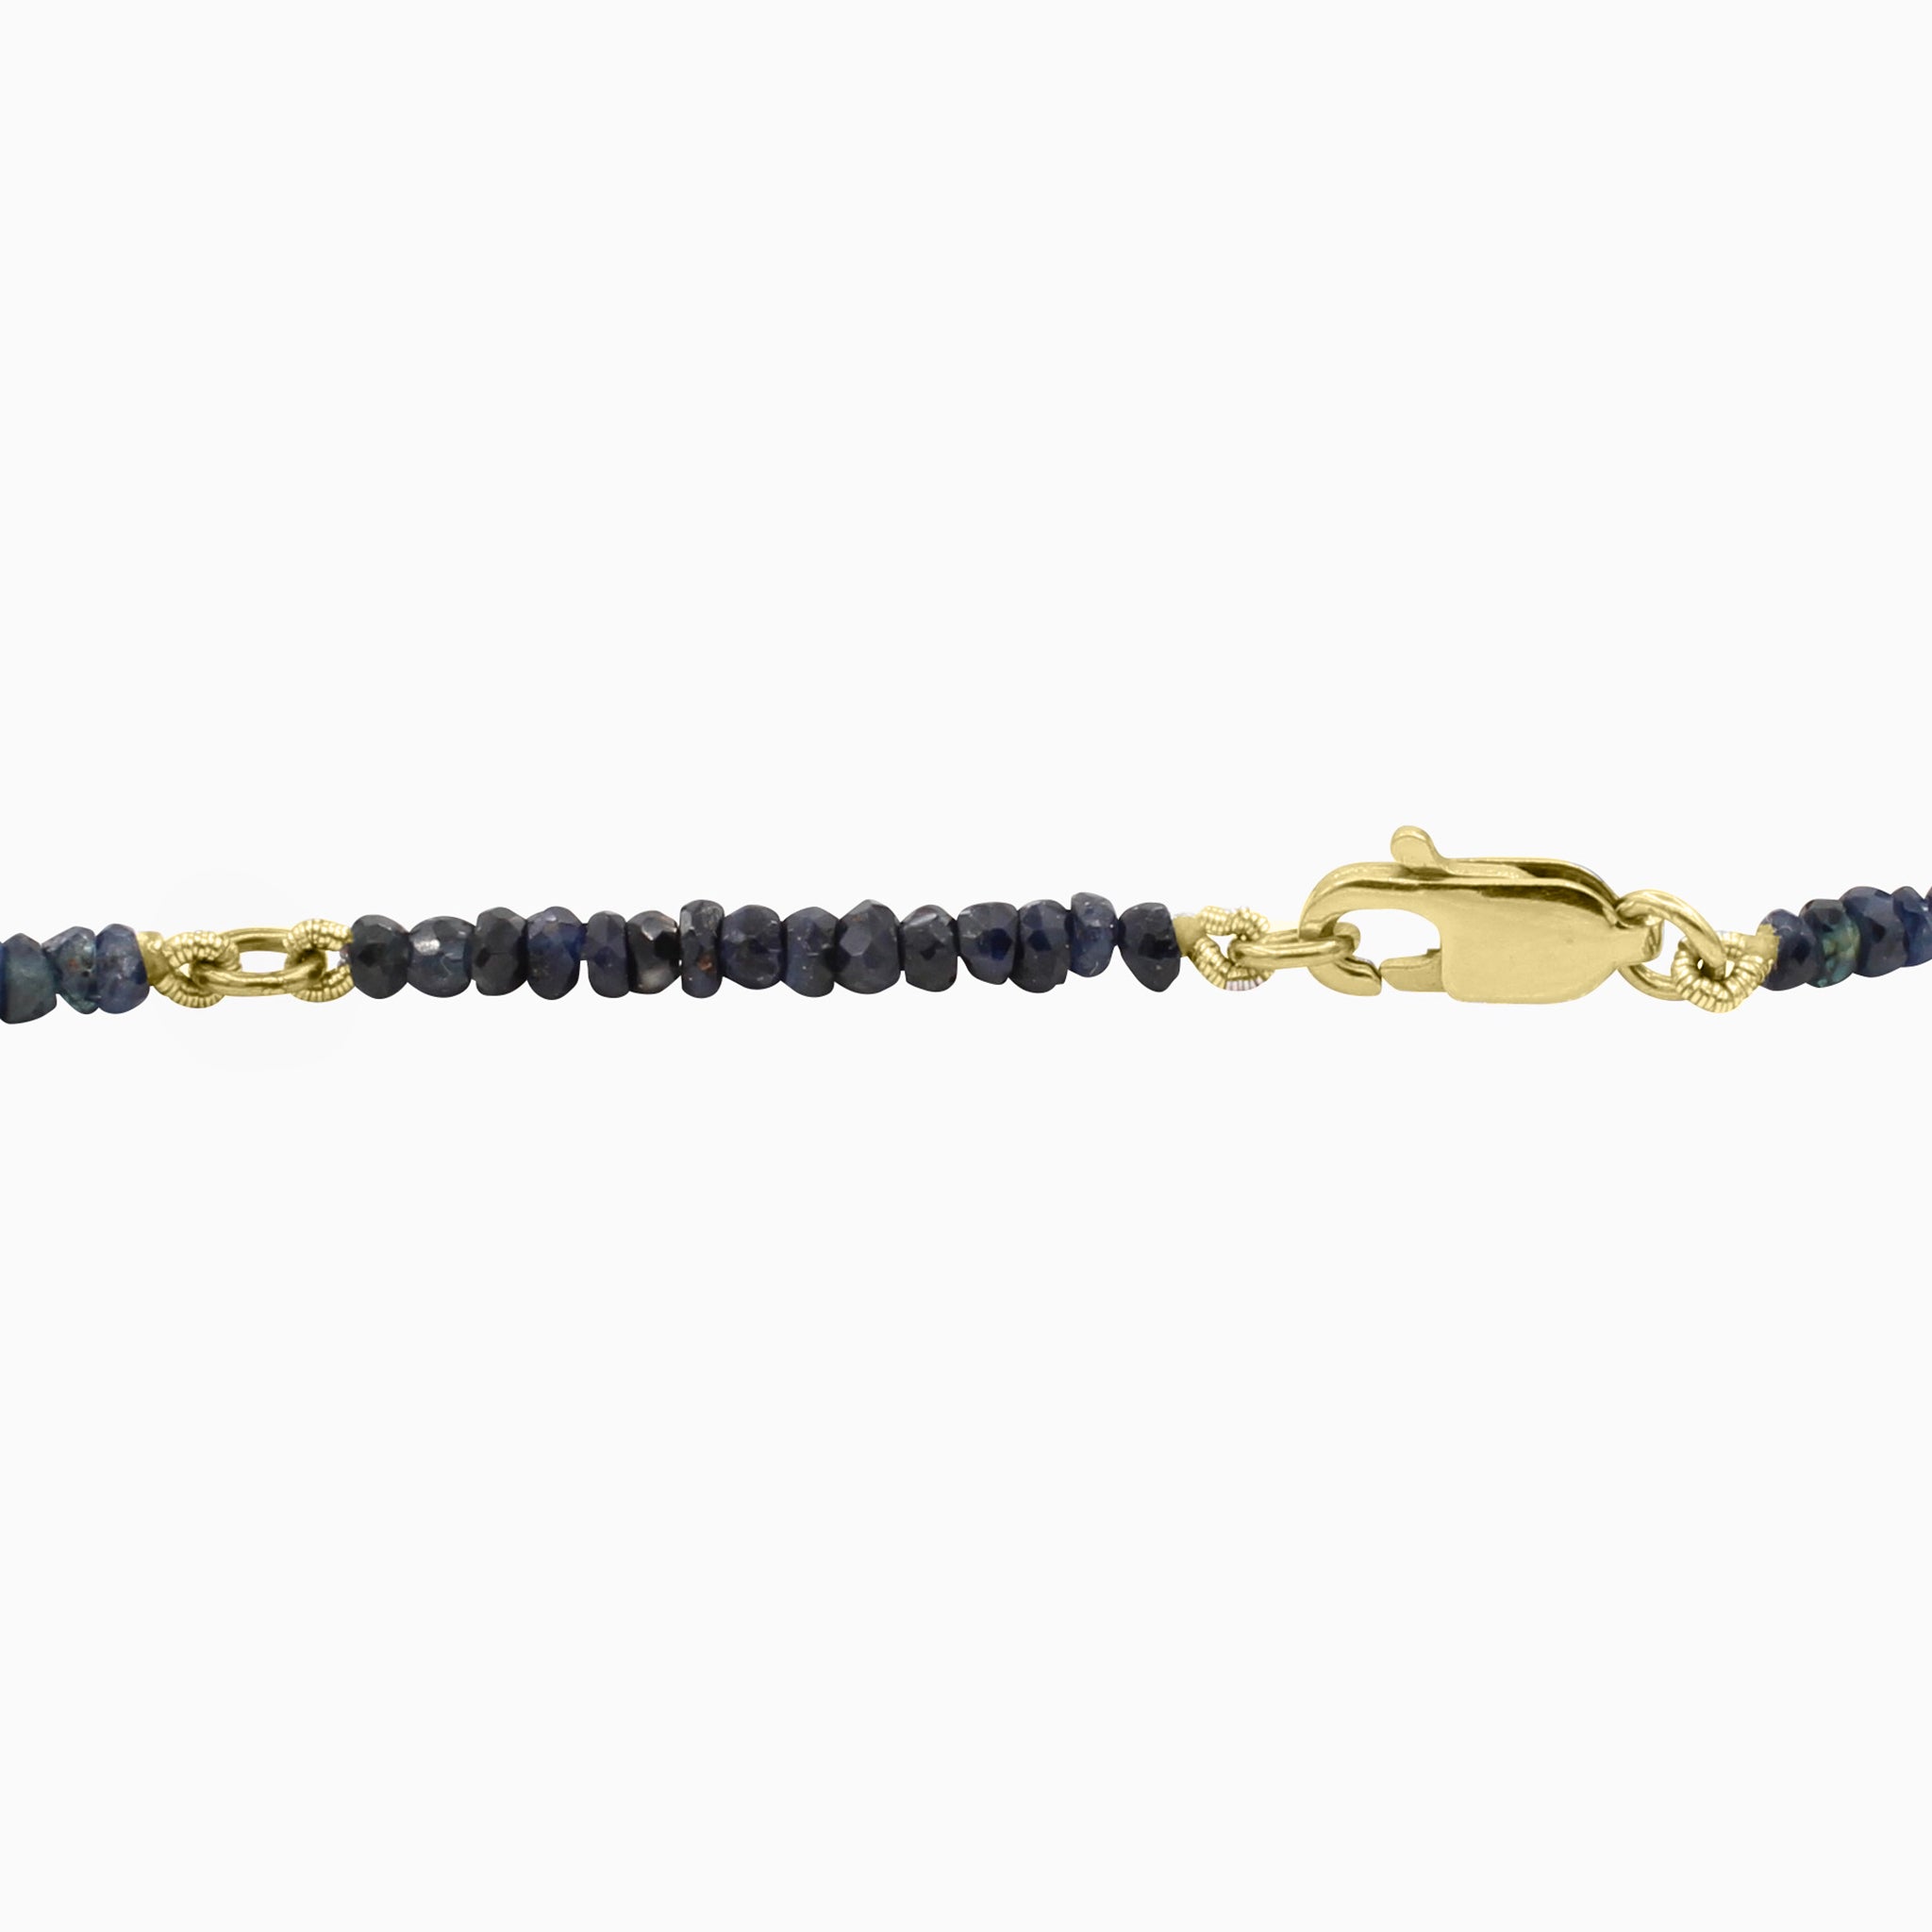 Blue 40CT Adjustable Ombre Sapphire Choker Necklace, 14k Yellow Gold Lobster Clasp Closure